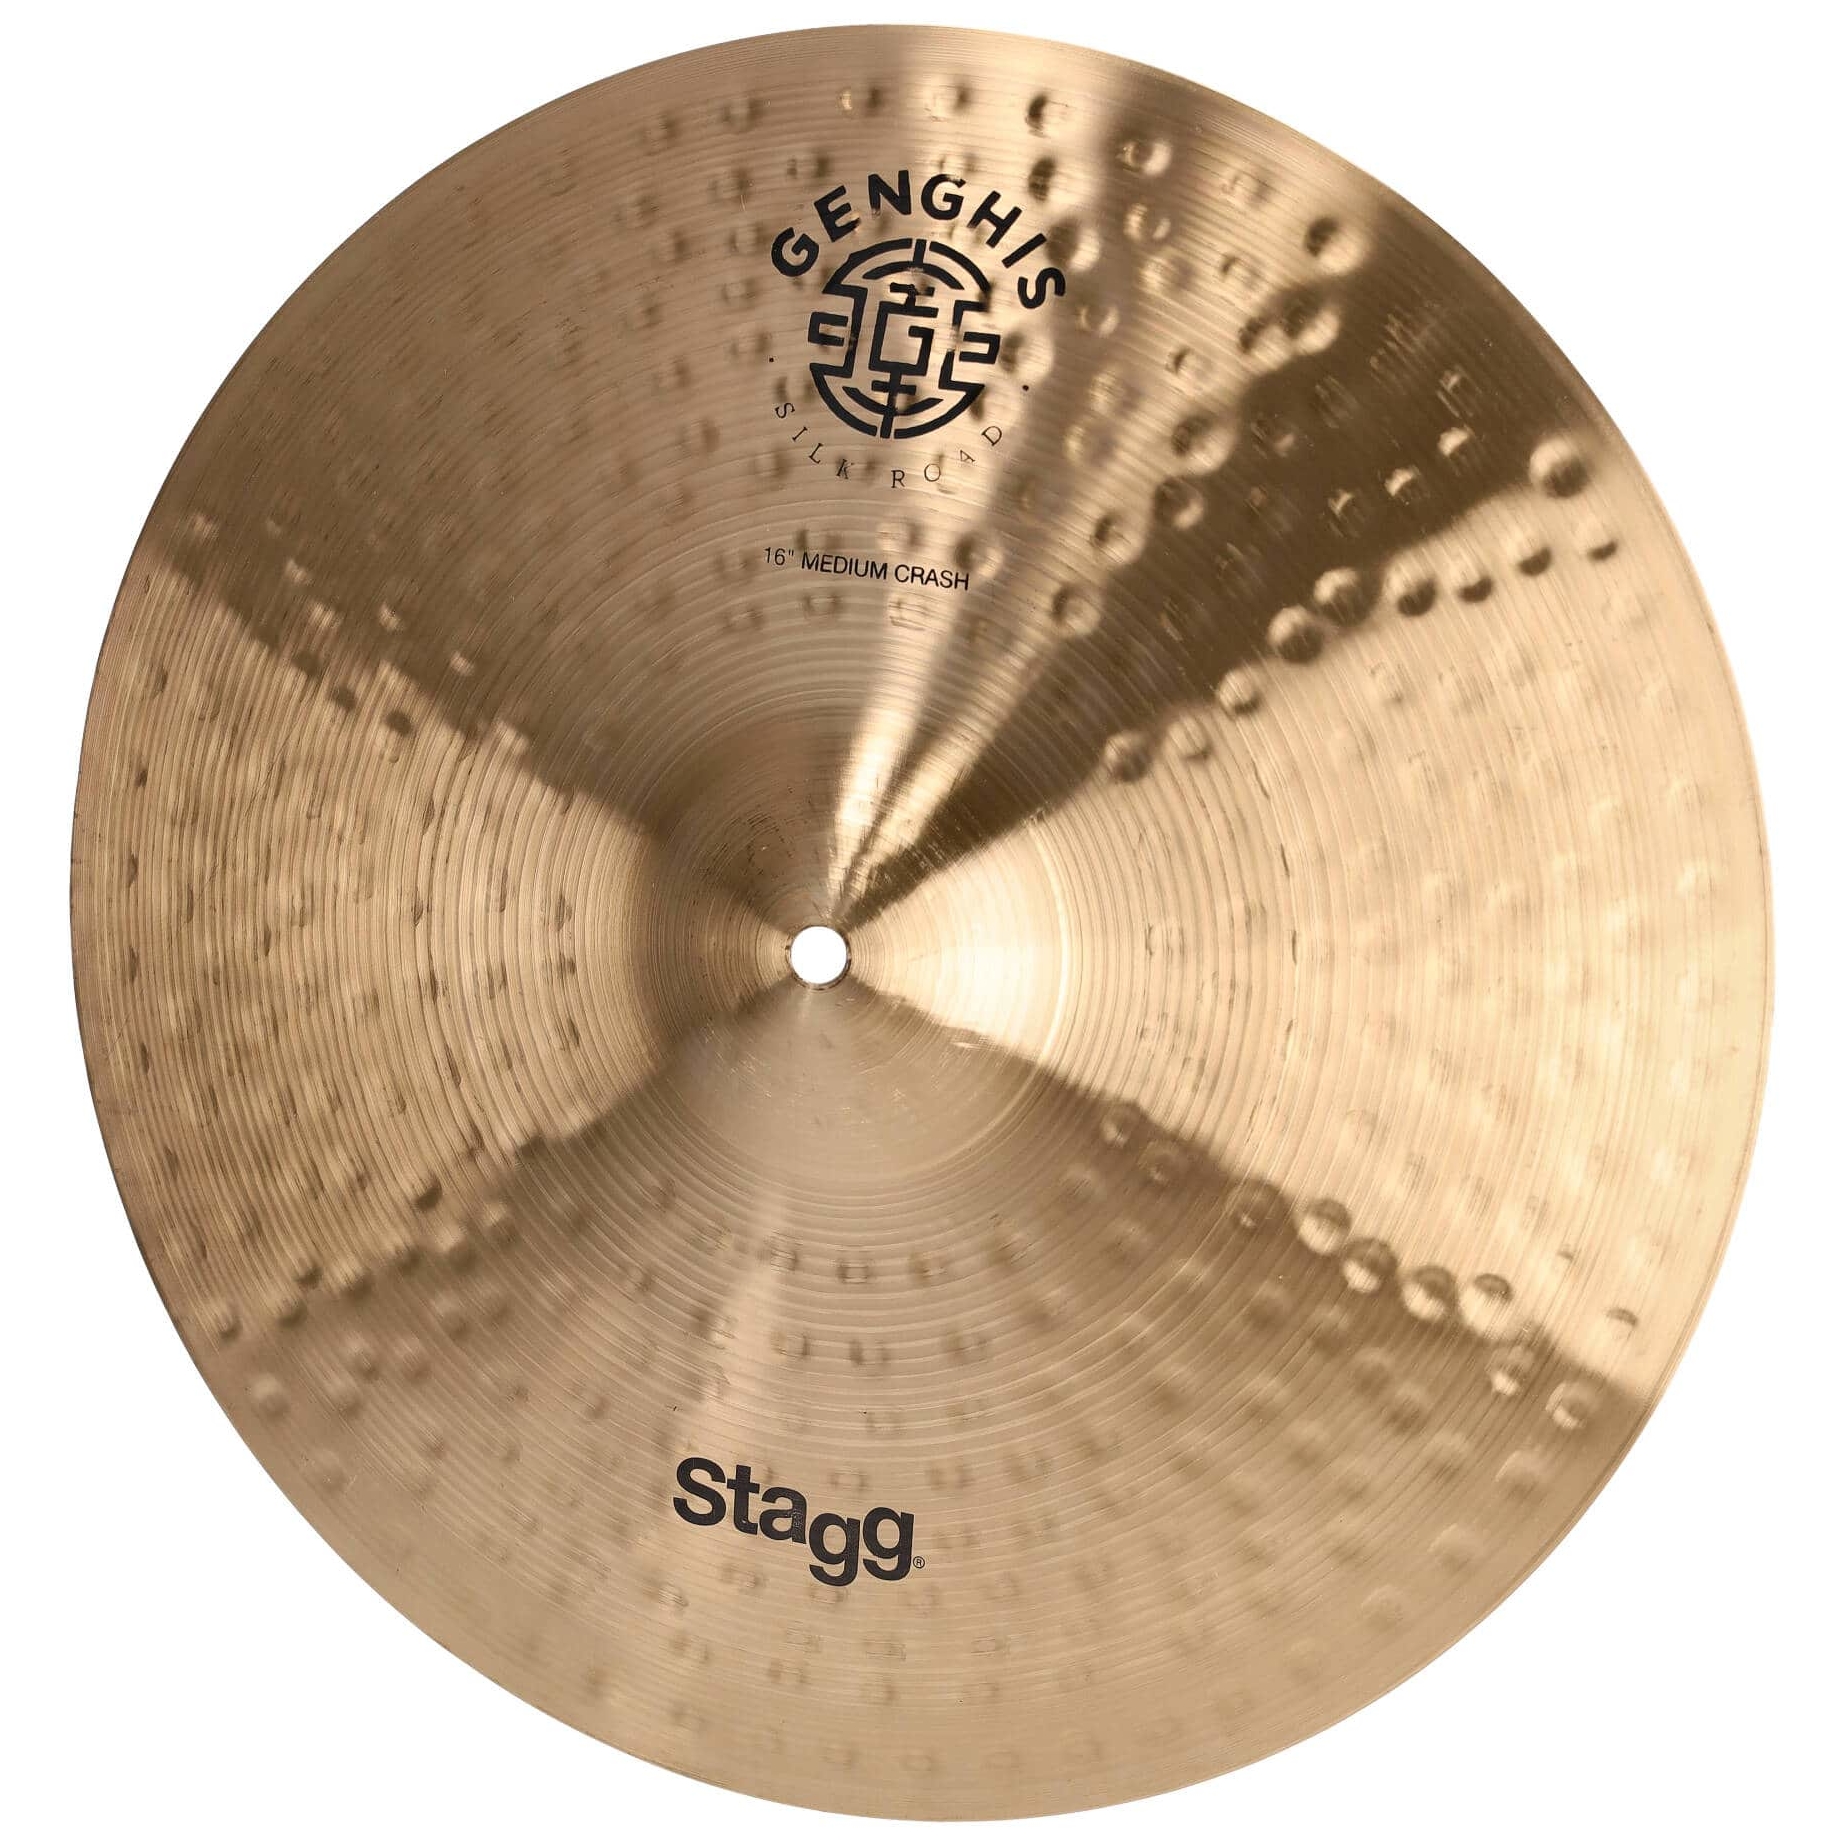 Stagg Genghis Classic Series Crash - 16 Zoll B-Ware